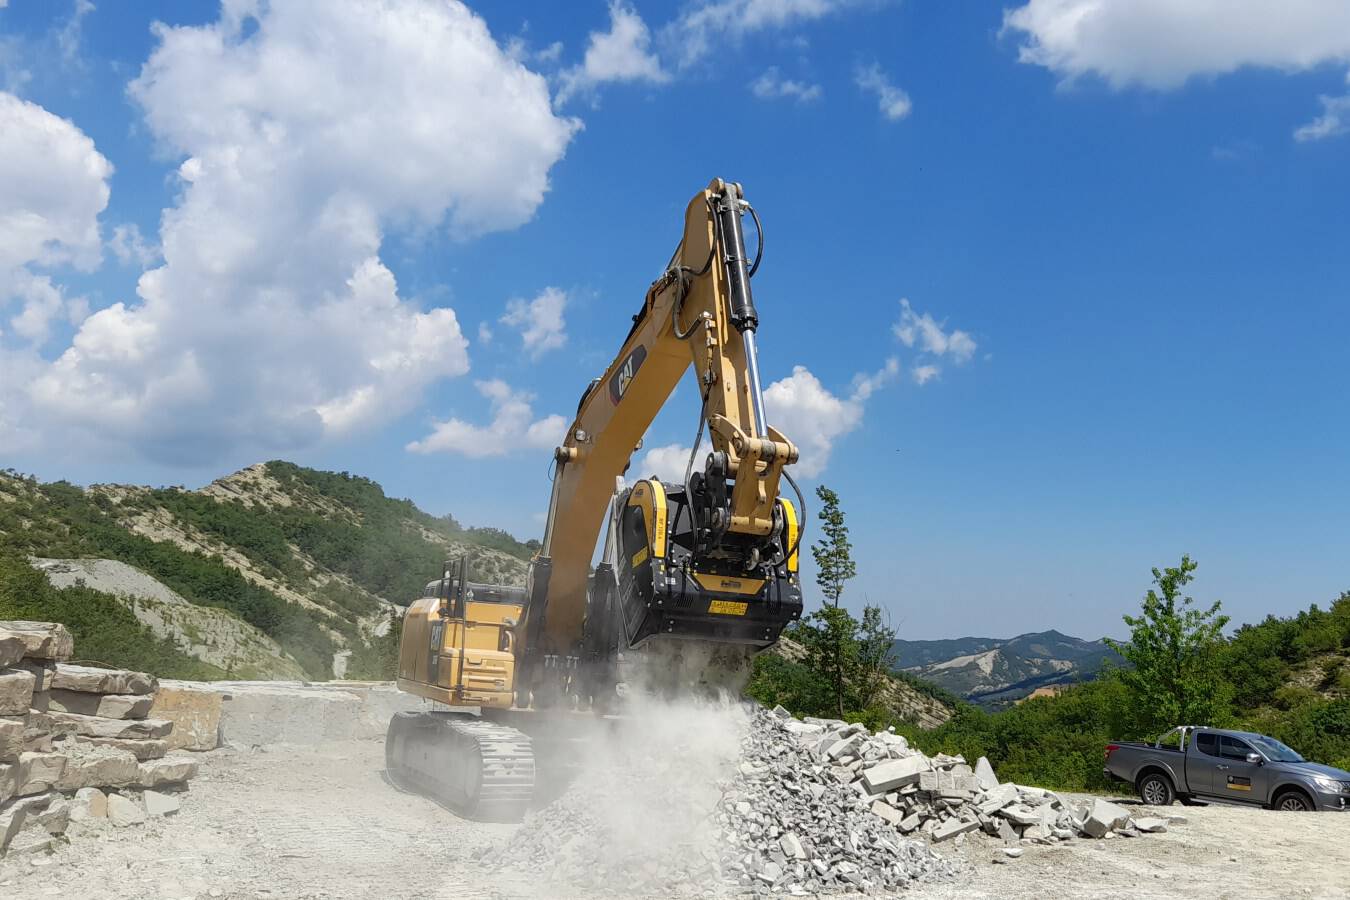 From waste to road with MB Crusher units With MB Crusher units installed at the excavator, mining and processing waste return to the production cycle